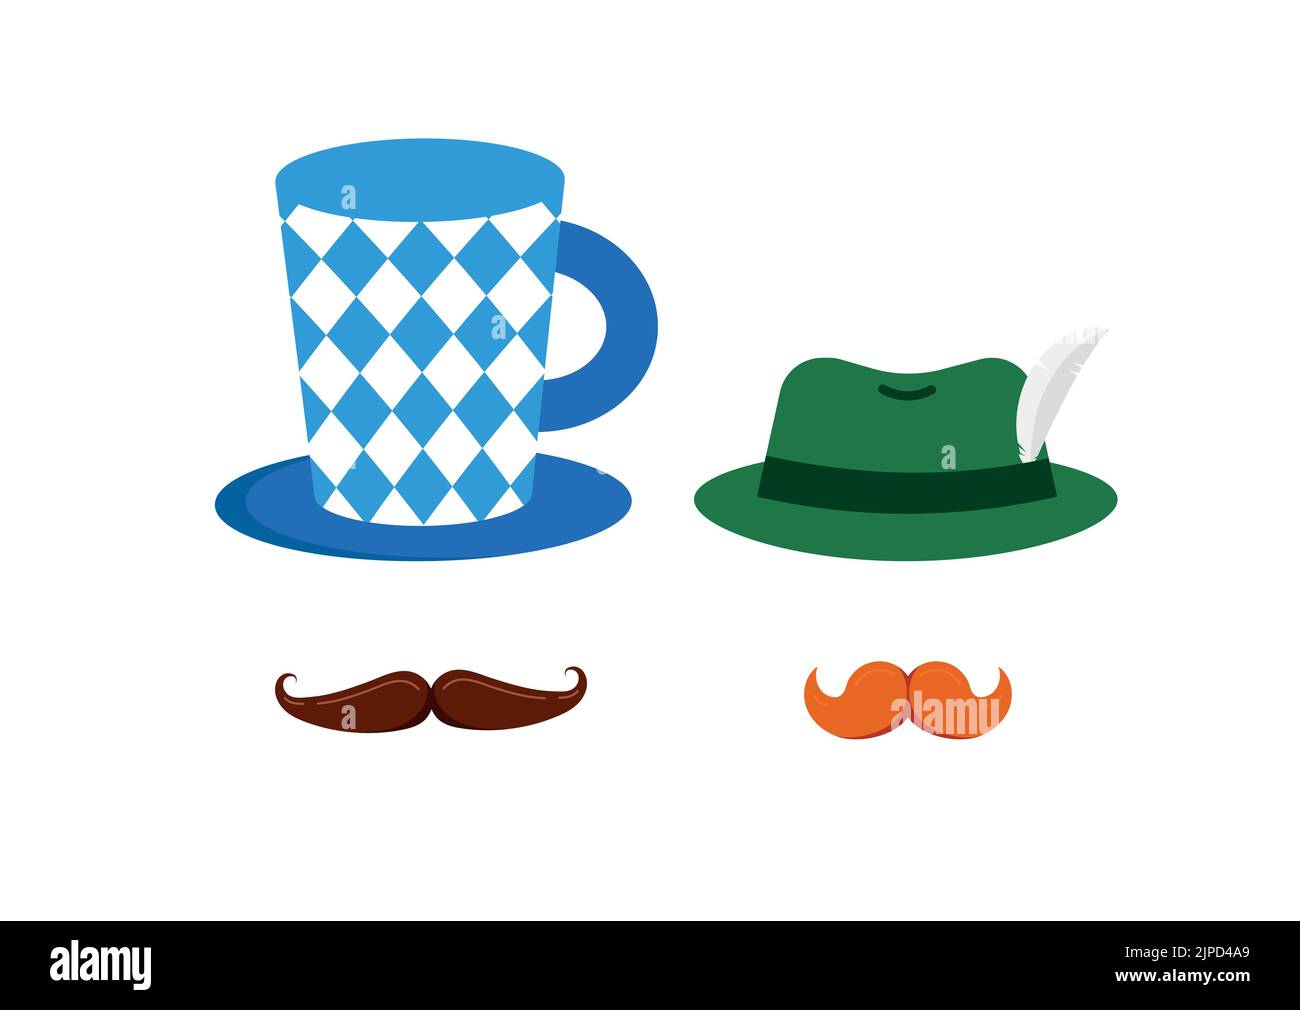 Oktoberfest hat with feather and mustache icon set isolated on white background. Stock Vector